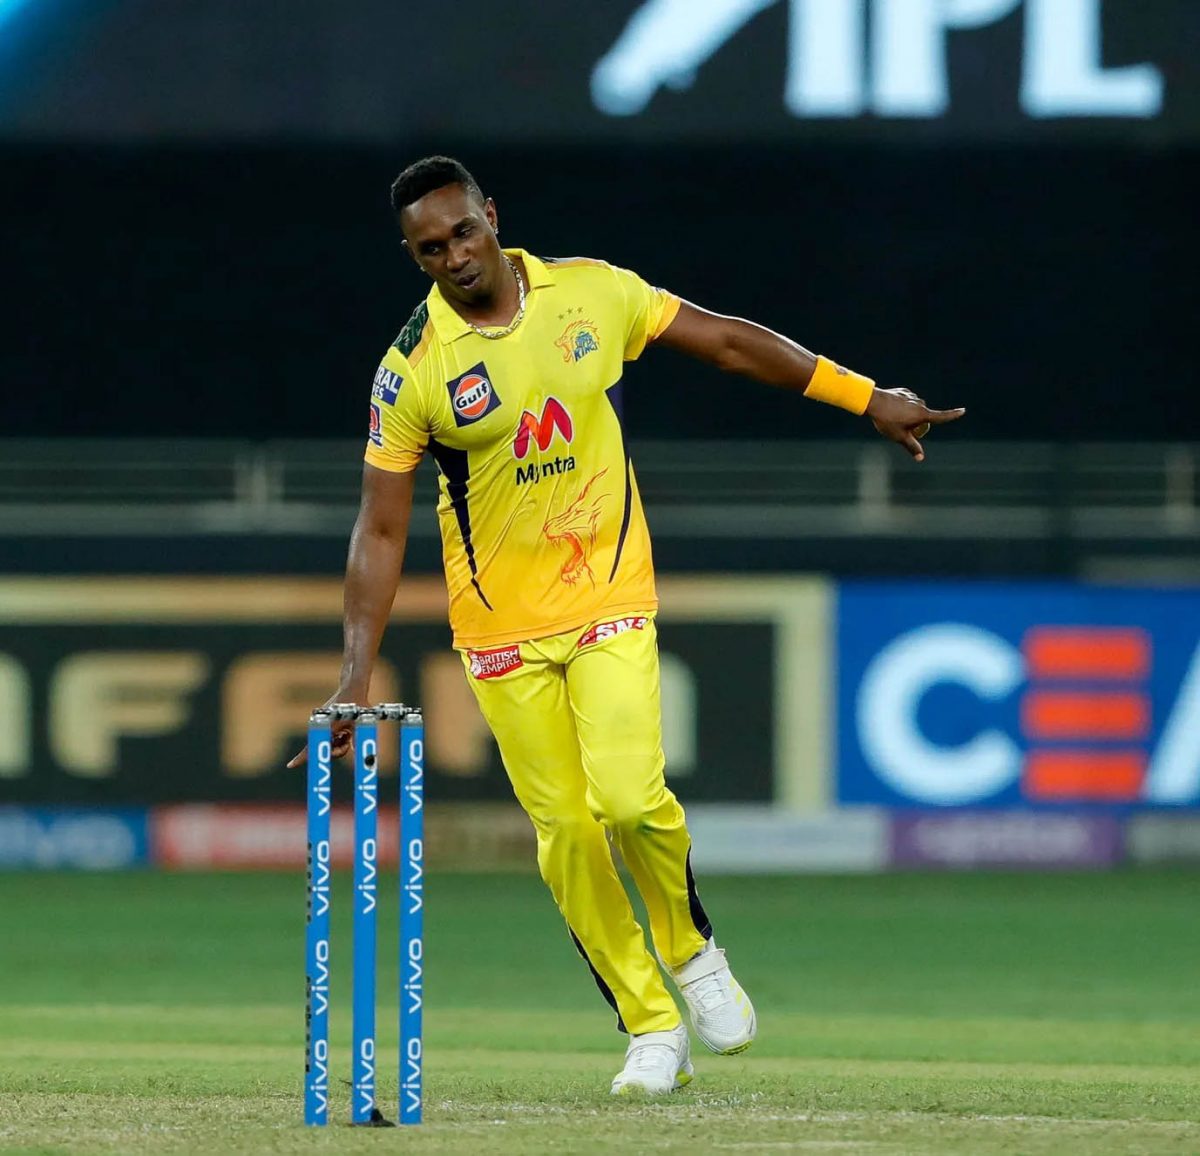 Veteran Dwayne Bravo yesterday reinforced his T20 death bowling credentials taking two wickets in the final over where he conceded just three runs as the Chennai Super Kings defeated the Mumbai Indians in their El Classico as the Indian Premier League resumed after a four month hiatus caused by the Coronavirus pandemic. (Photo courtesy IPL)